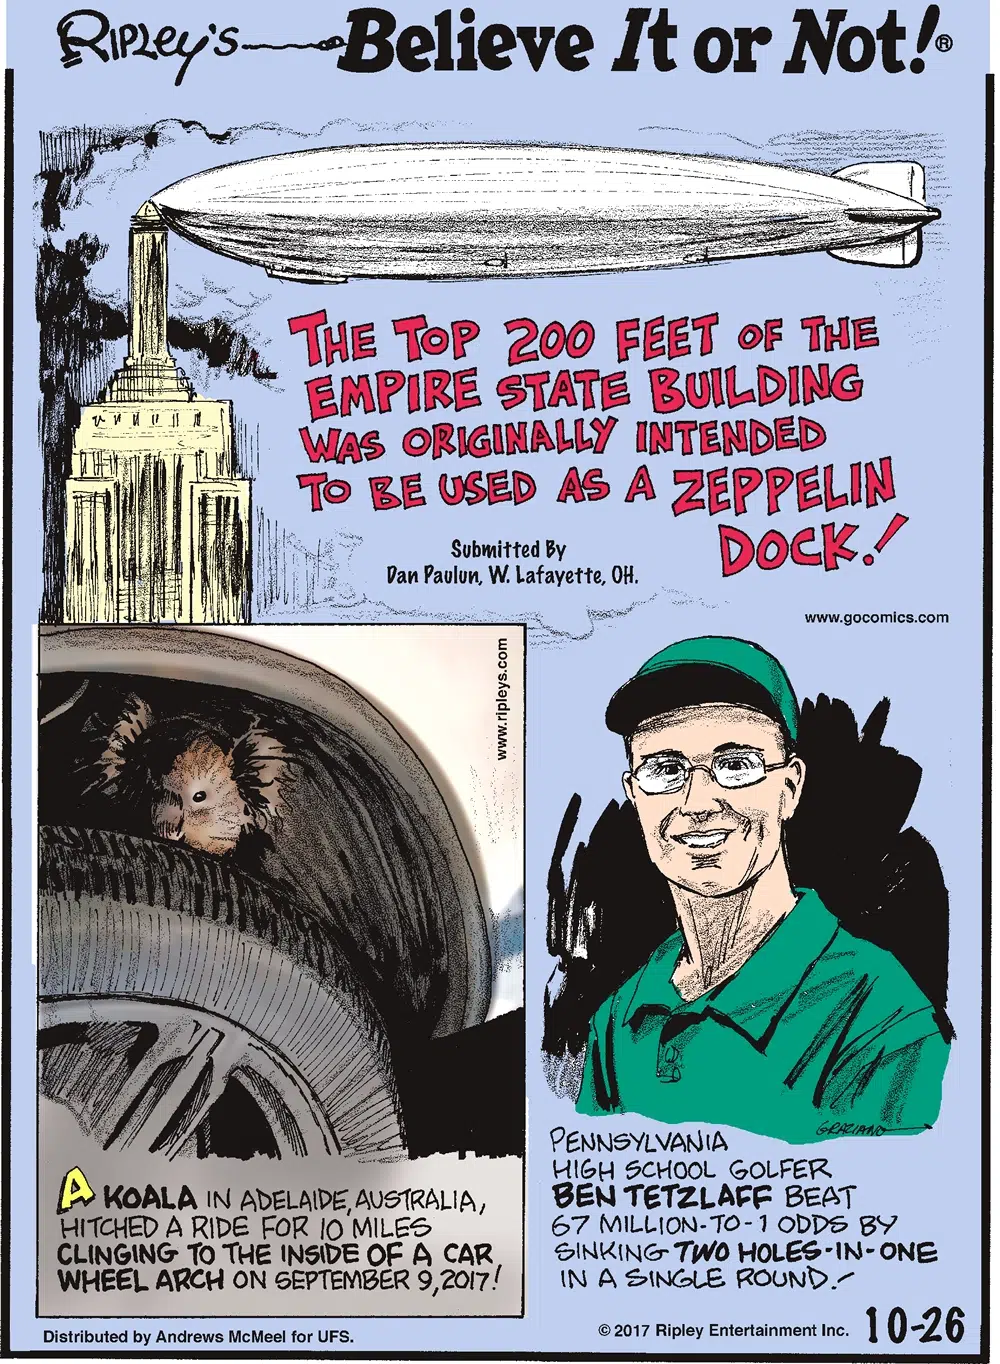 The top 200 feet of the Empire State Building was originally intended to be used as a zeppelin dock! Submitted by Dan Paulun, W. Lafayette, OH.-------------------- A koala in Adelaide, Australia, hitched a ride for 10 miles clinging to the inside of a car wheel arch on September 9, 2017!--------------------- Pennsylvania high school golfer Ben Tetzlaff beat 67 million-to-1 odds by sinking two holes-in-one in a single round!